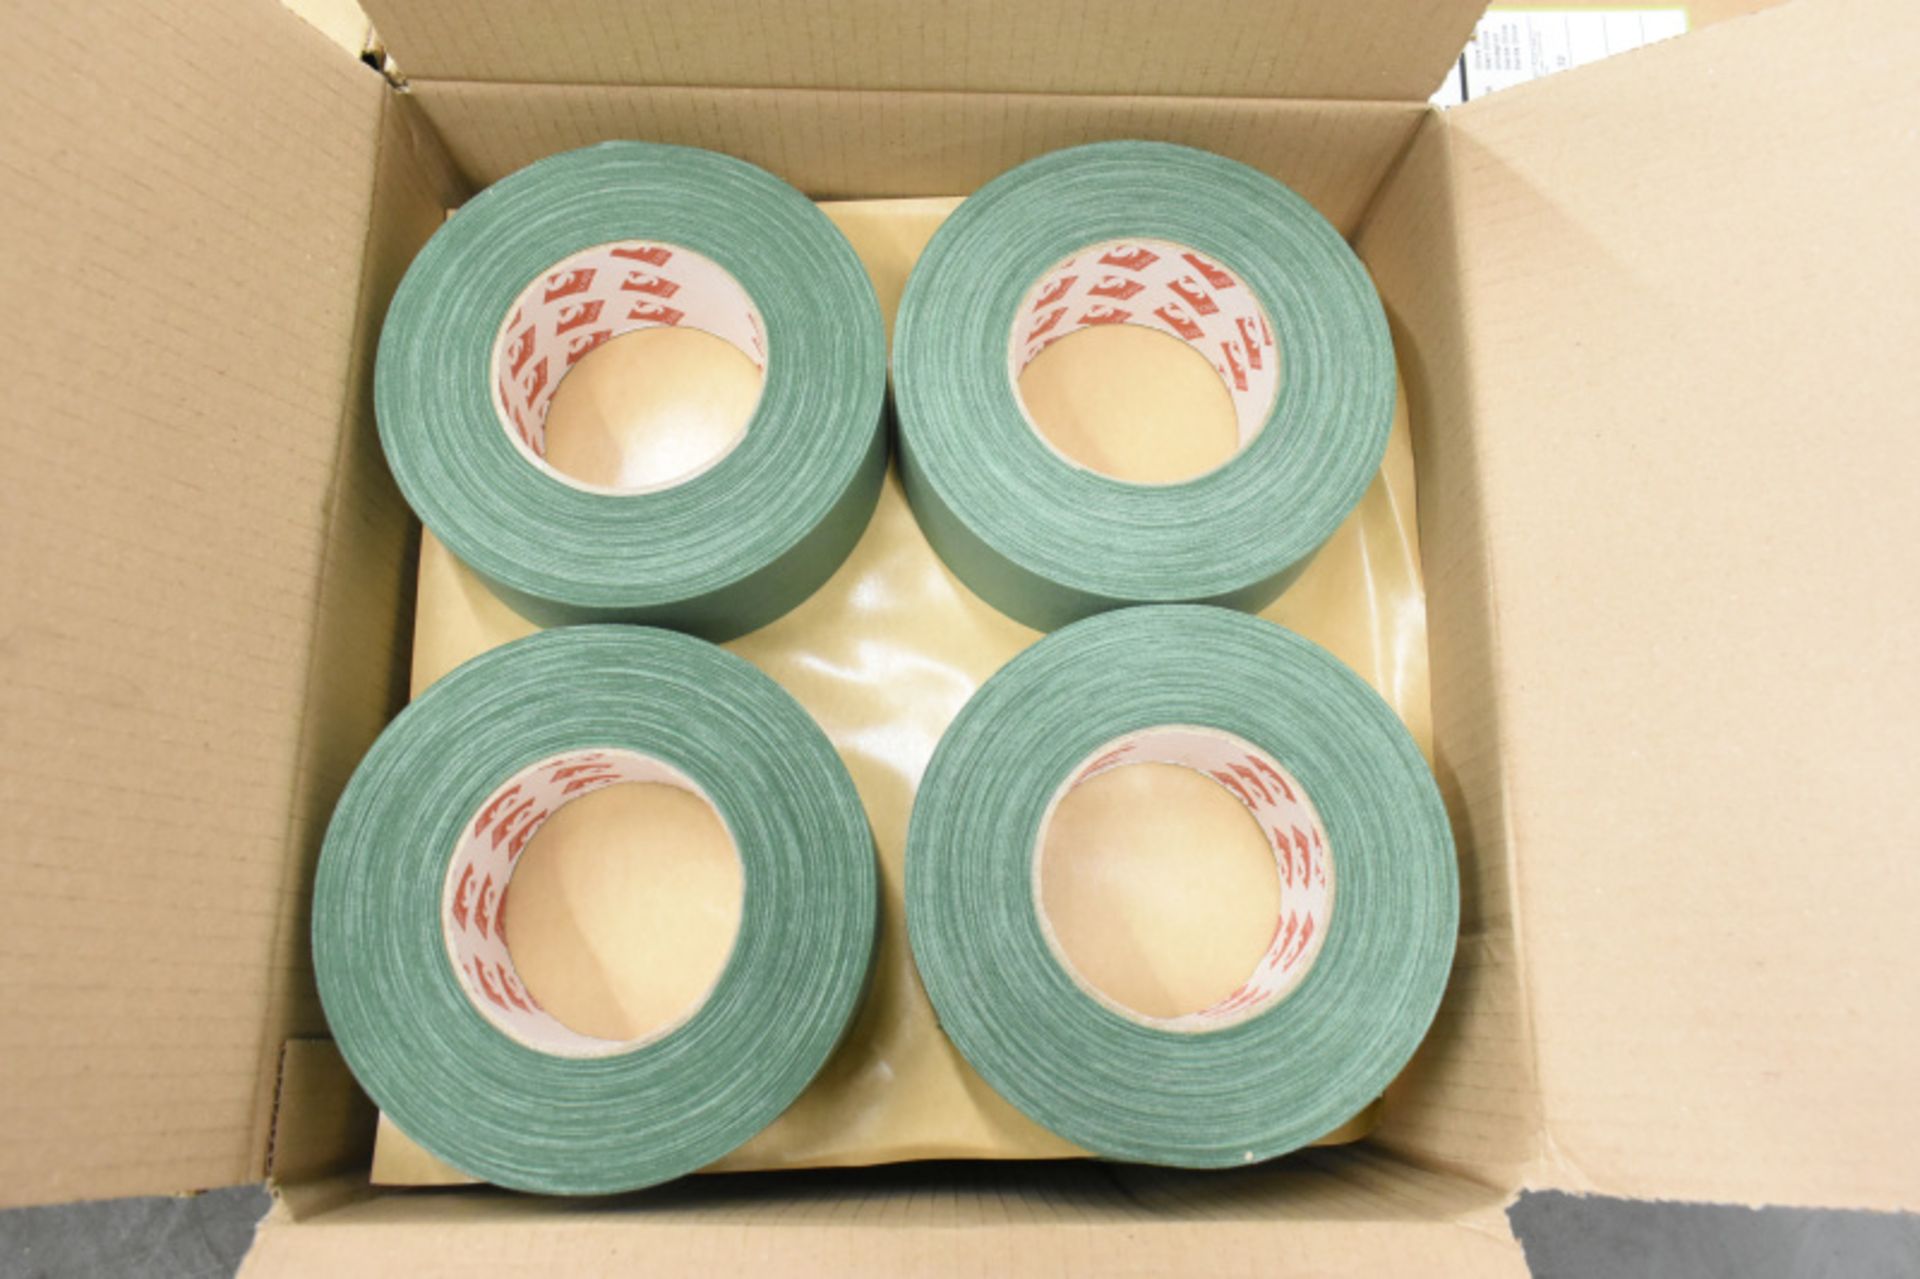 Scapa 3302 Pro Tape - Olive Green - 50mm x 50M rolls - 16 rolls per box - 28 boxes - Image 3 of 5